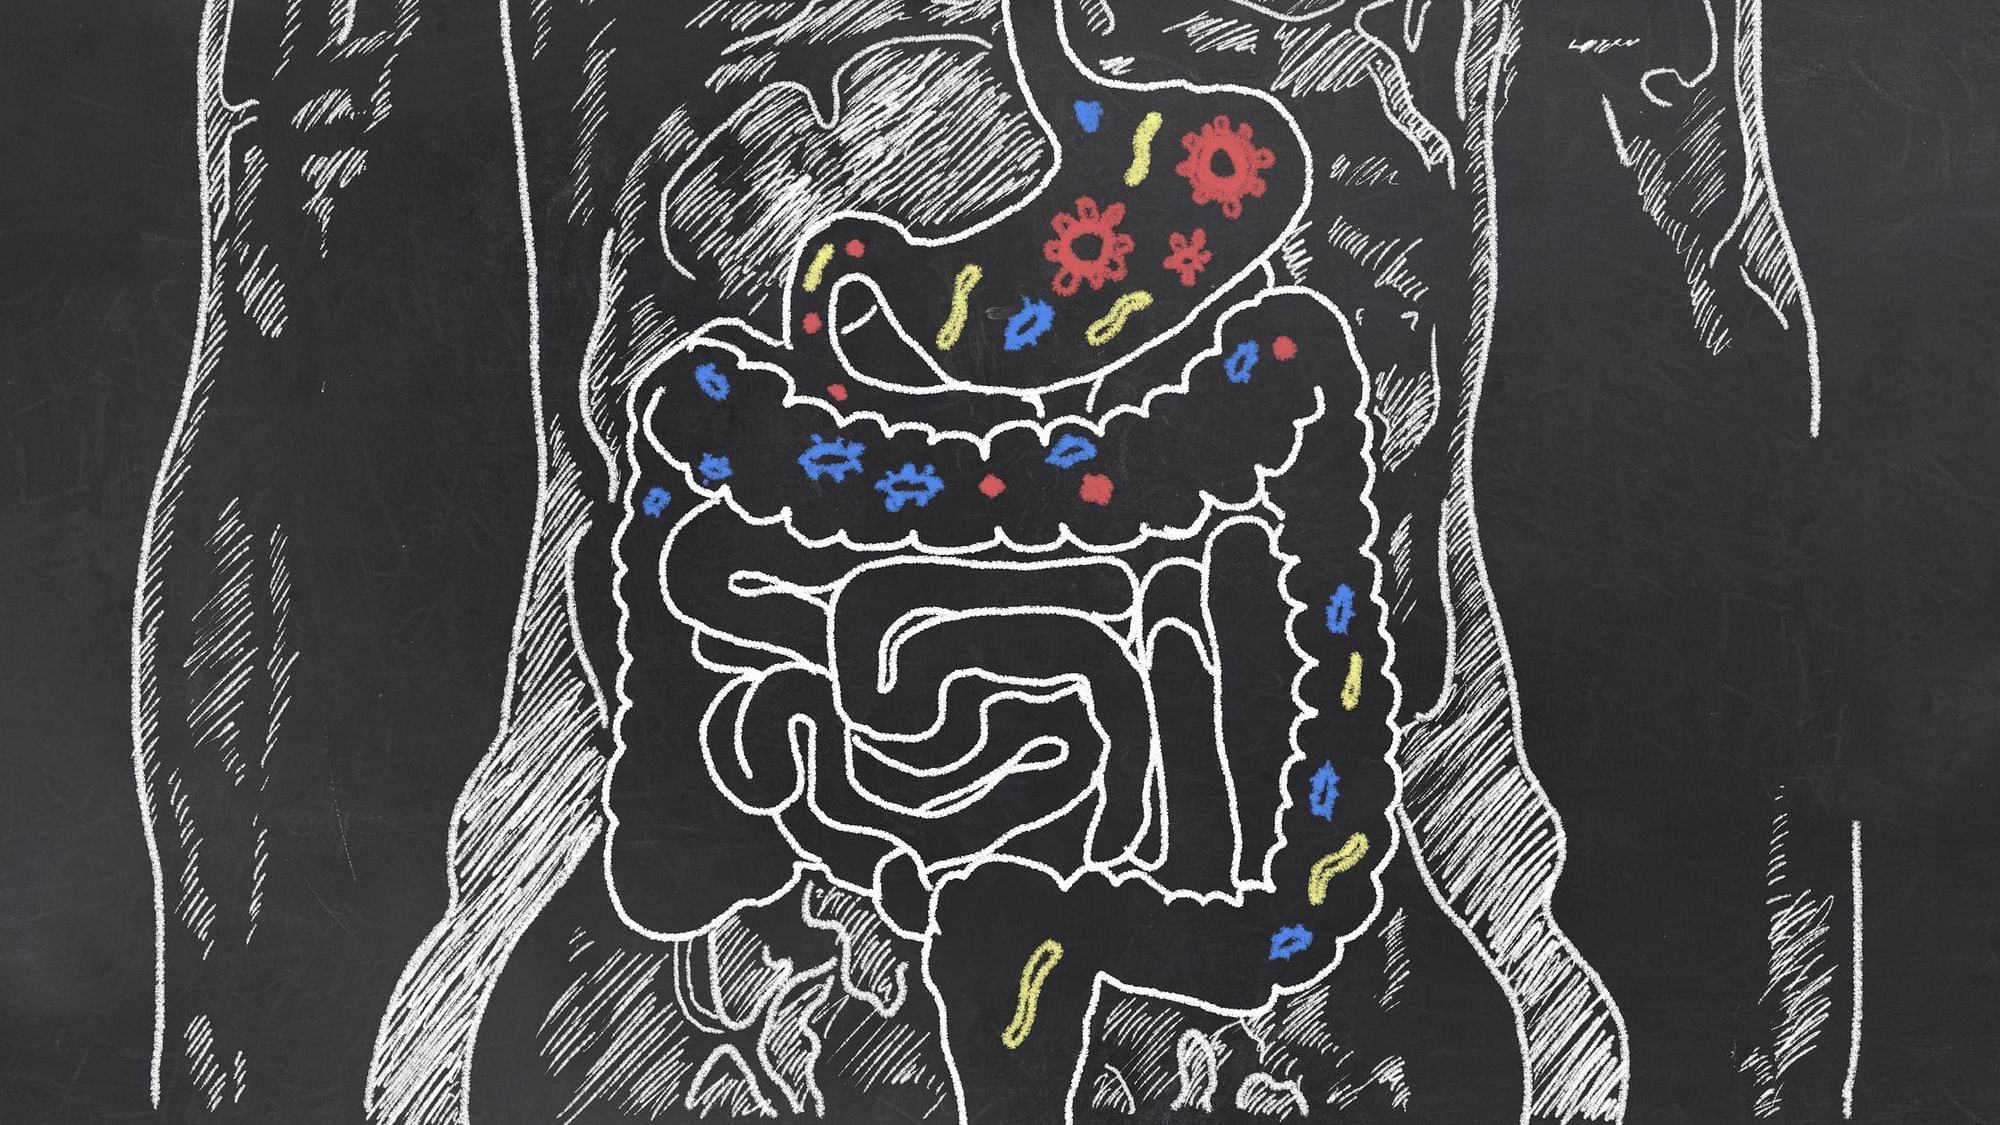 The researchers found that having a specific microbiota profile in their gut predicted the presence of PAH with 83 percent accuracy.